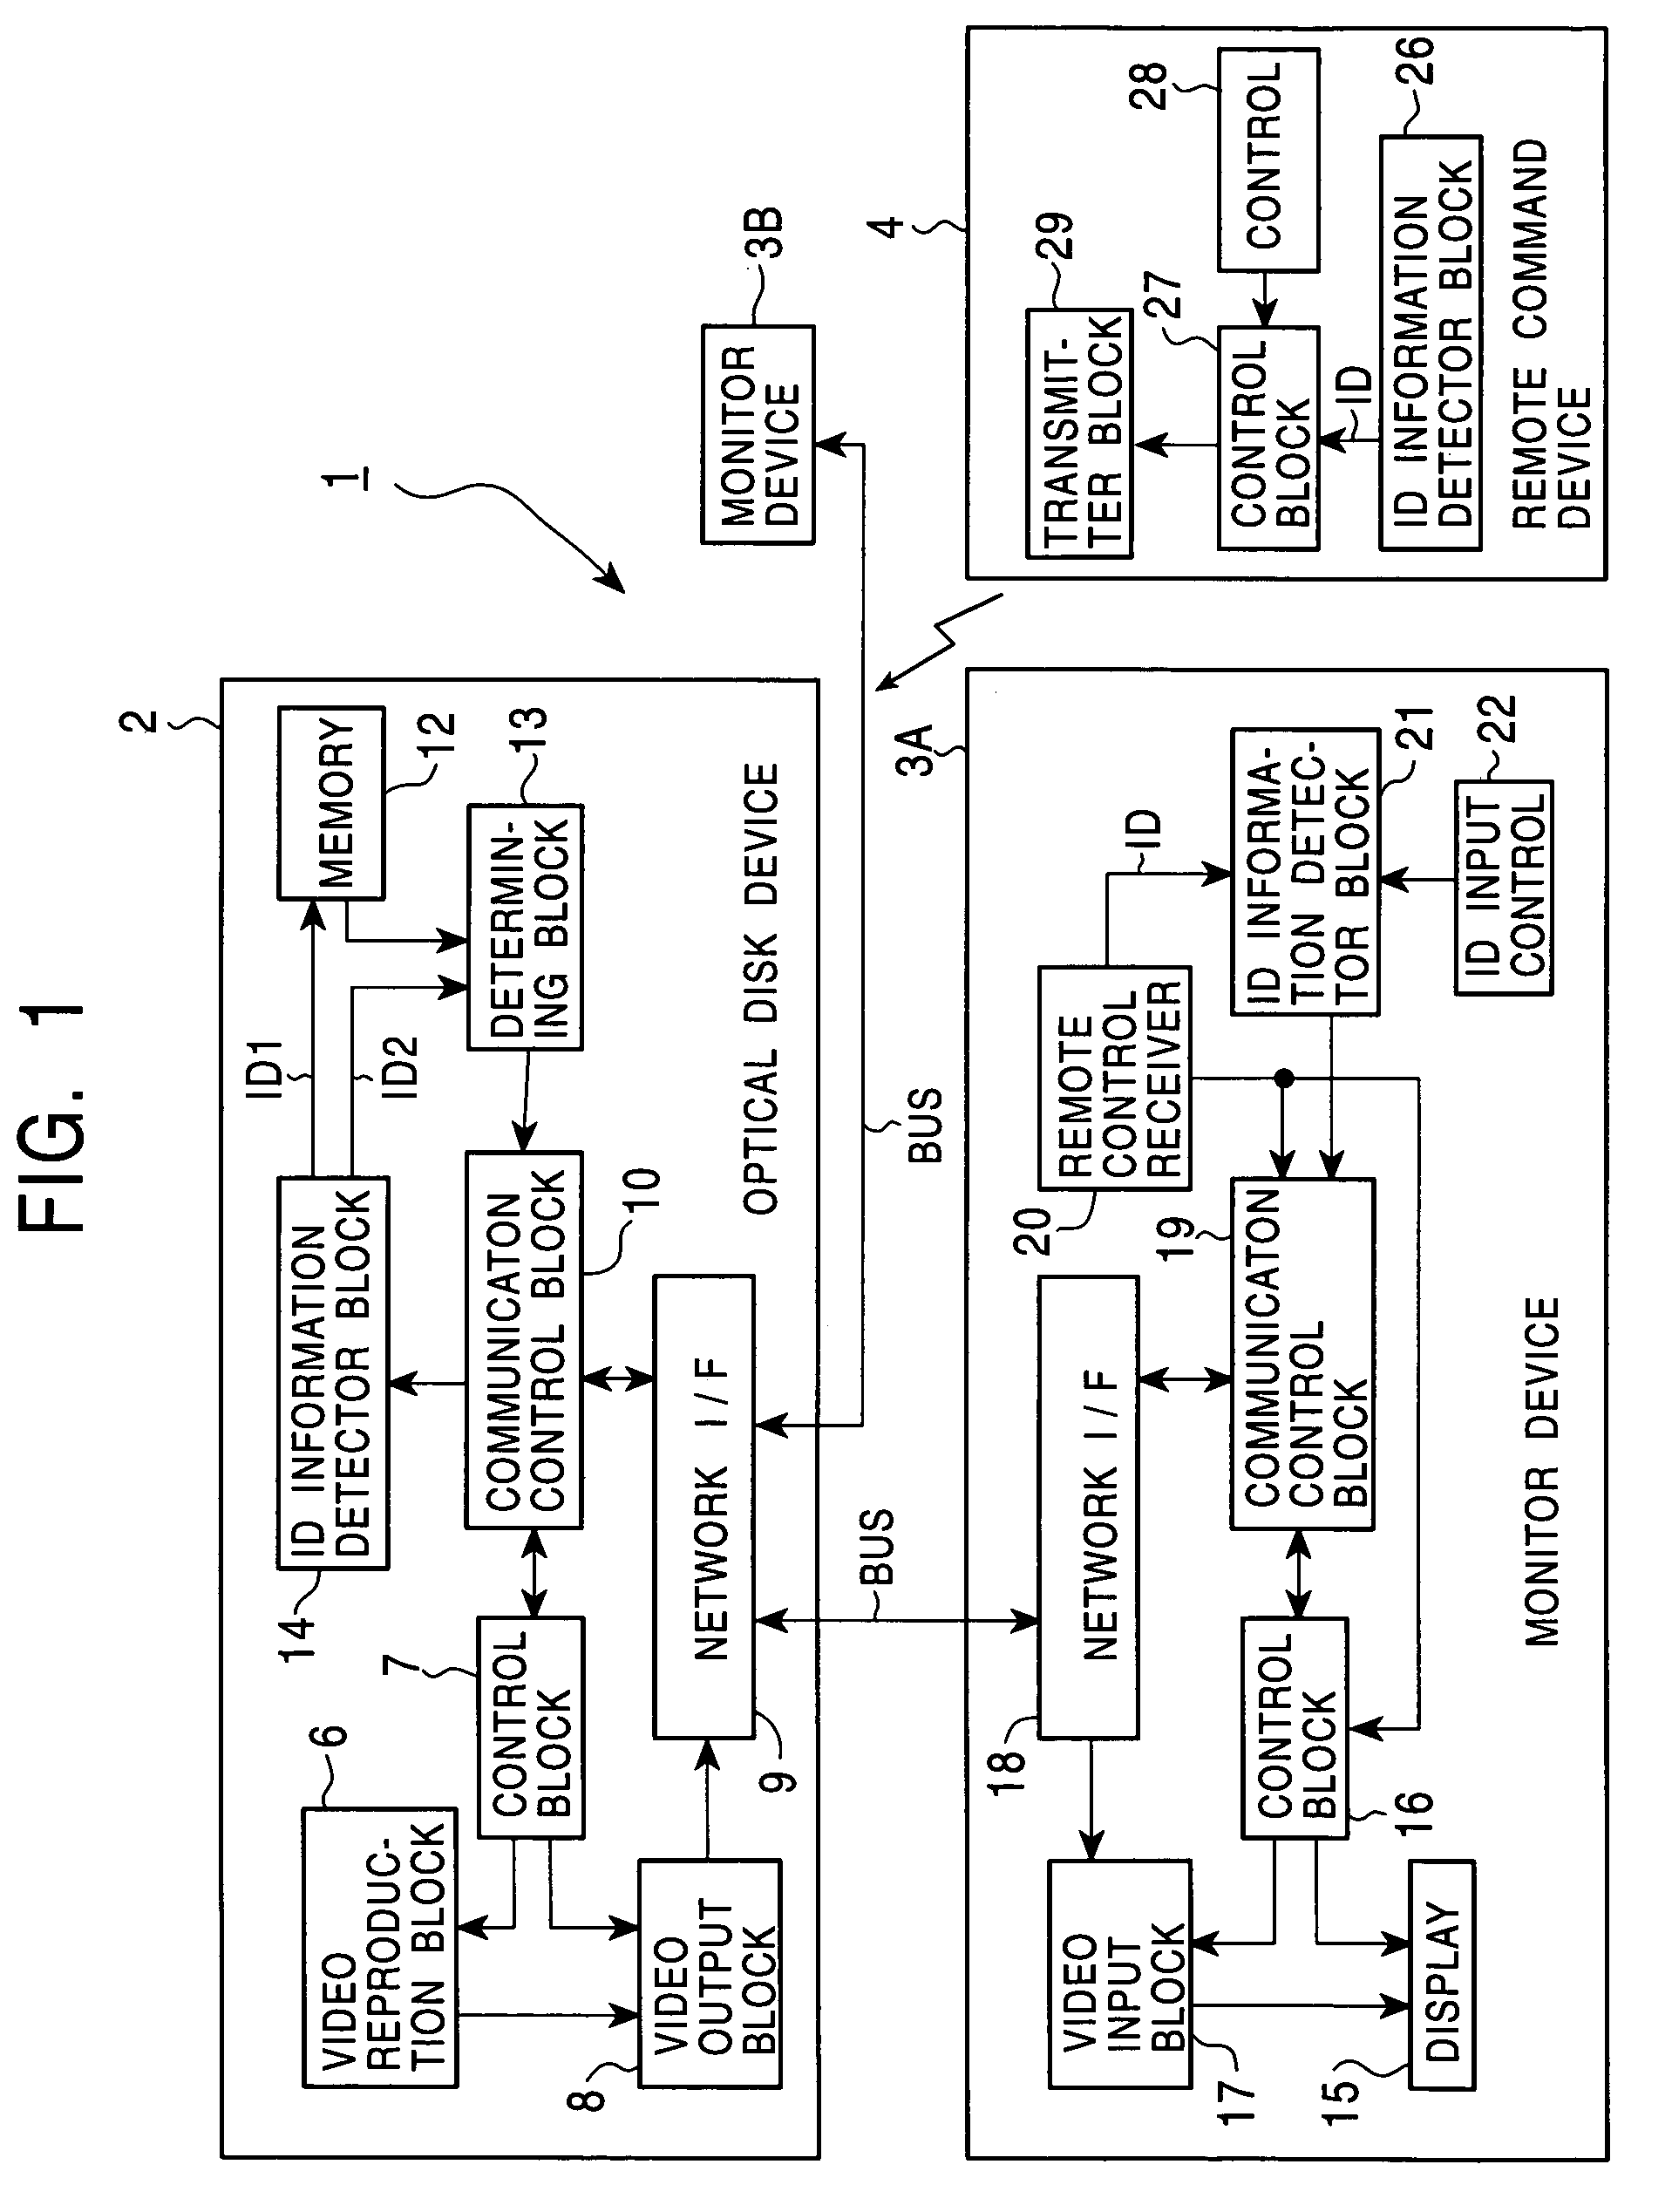 Information signal transmission system and remote control device for the same